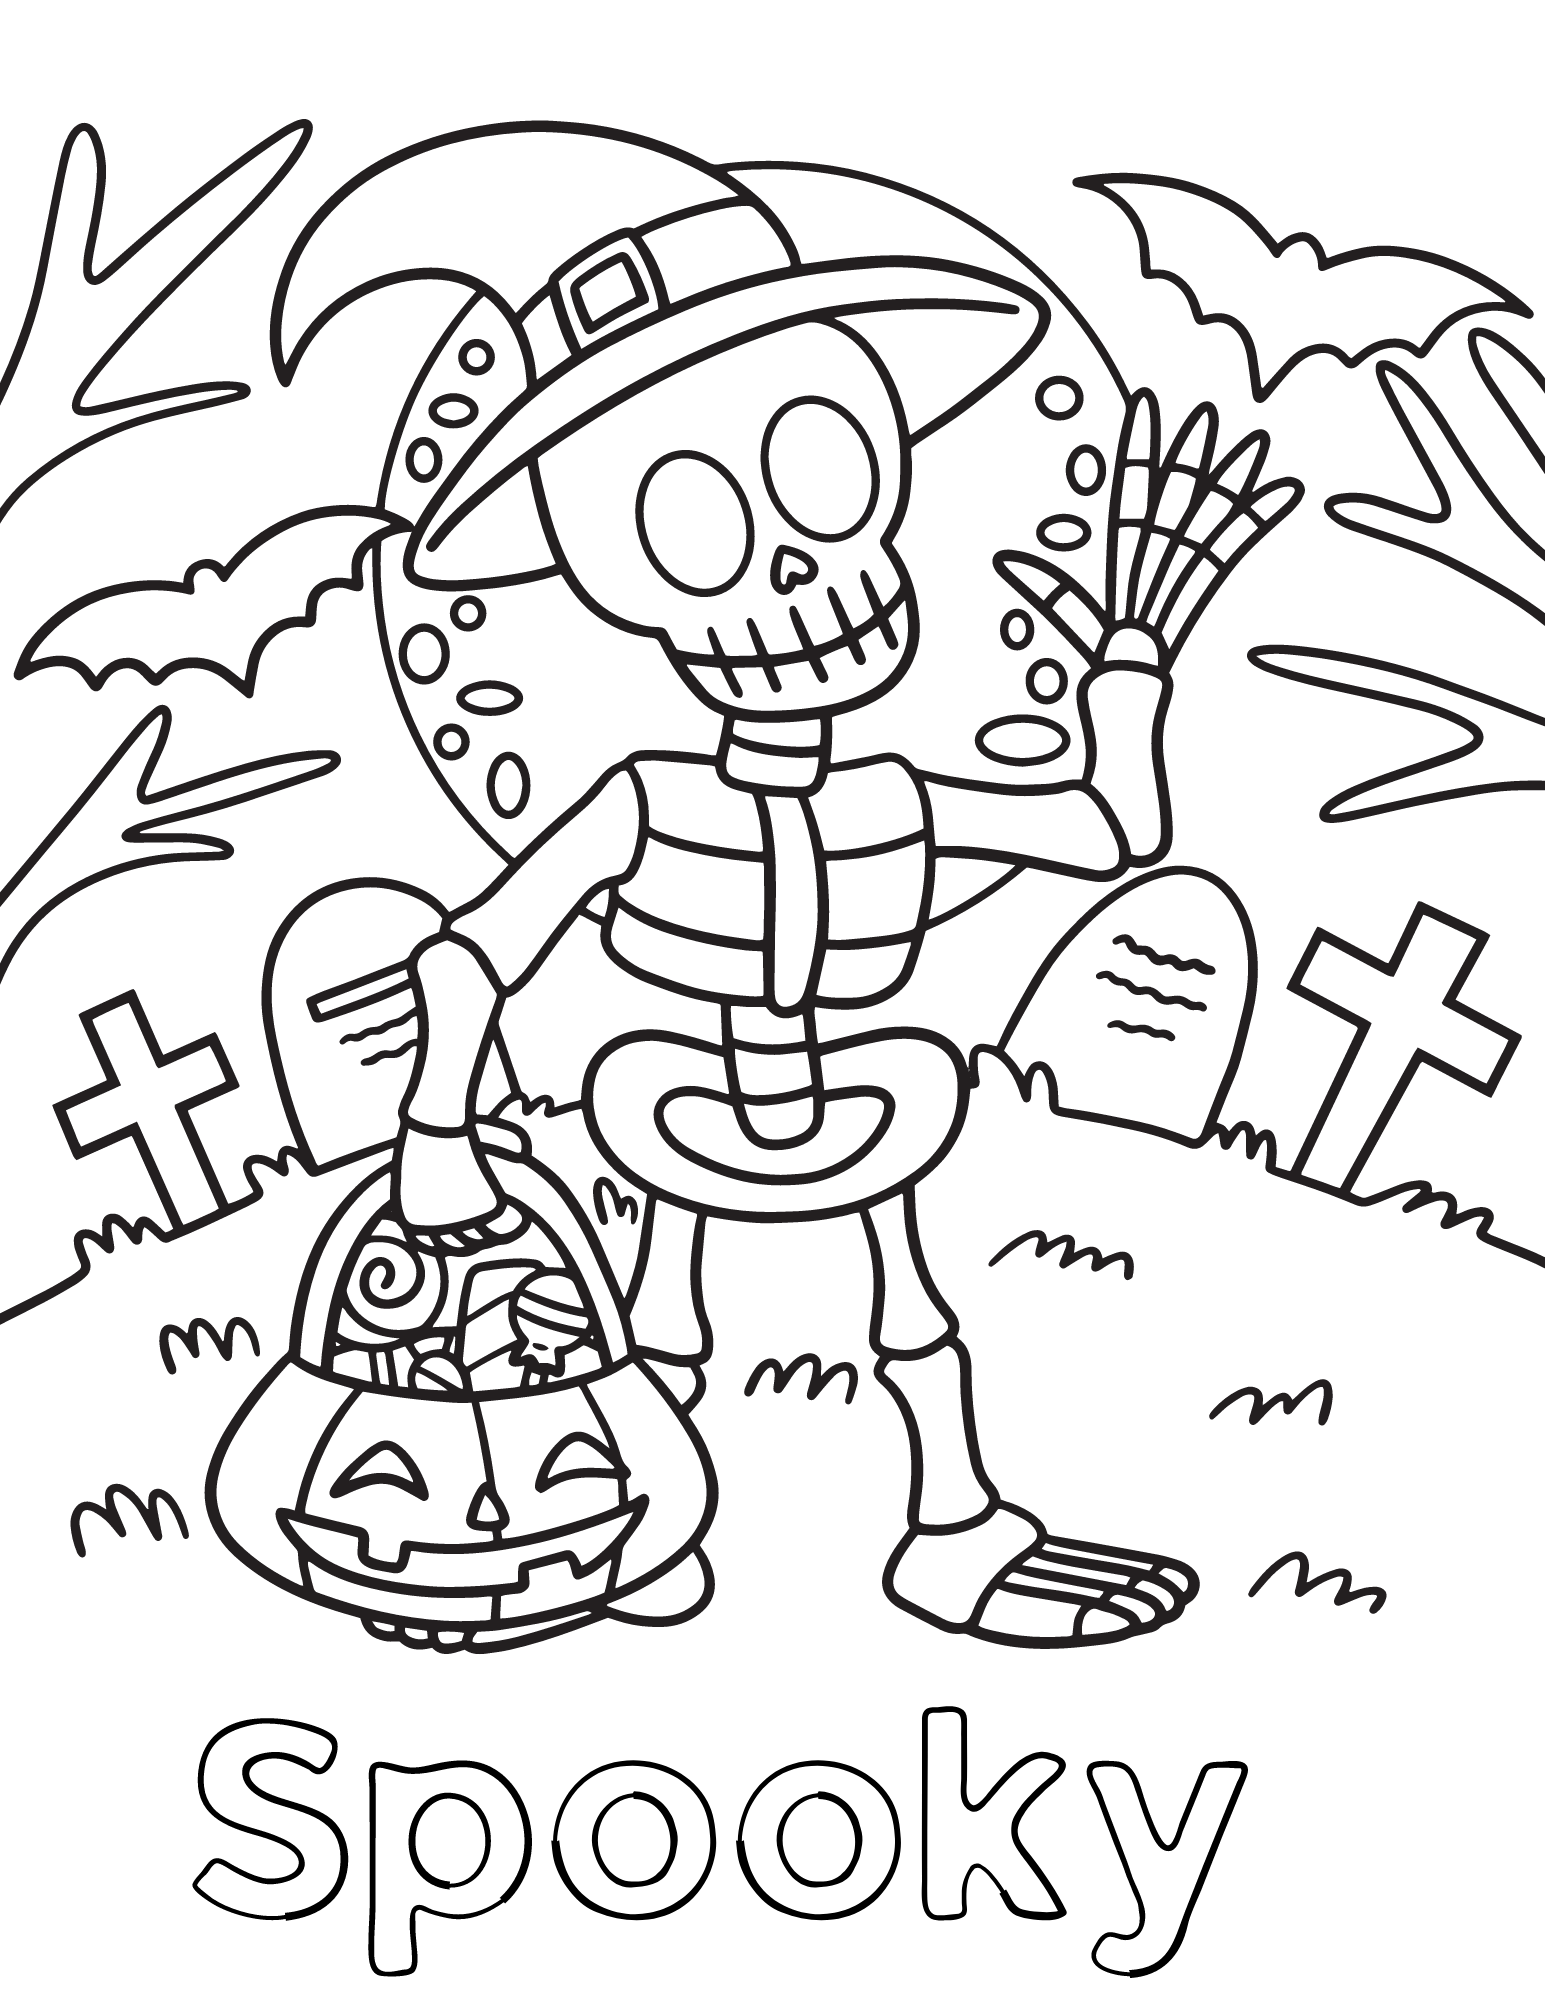 Spooky scary skeleton coloring pages for kids and adults